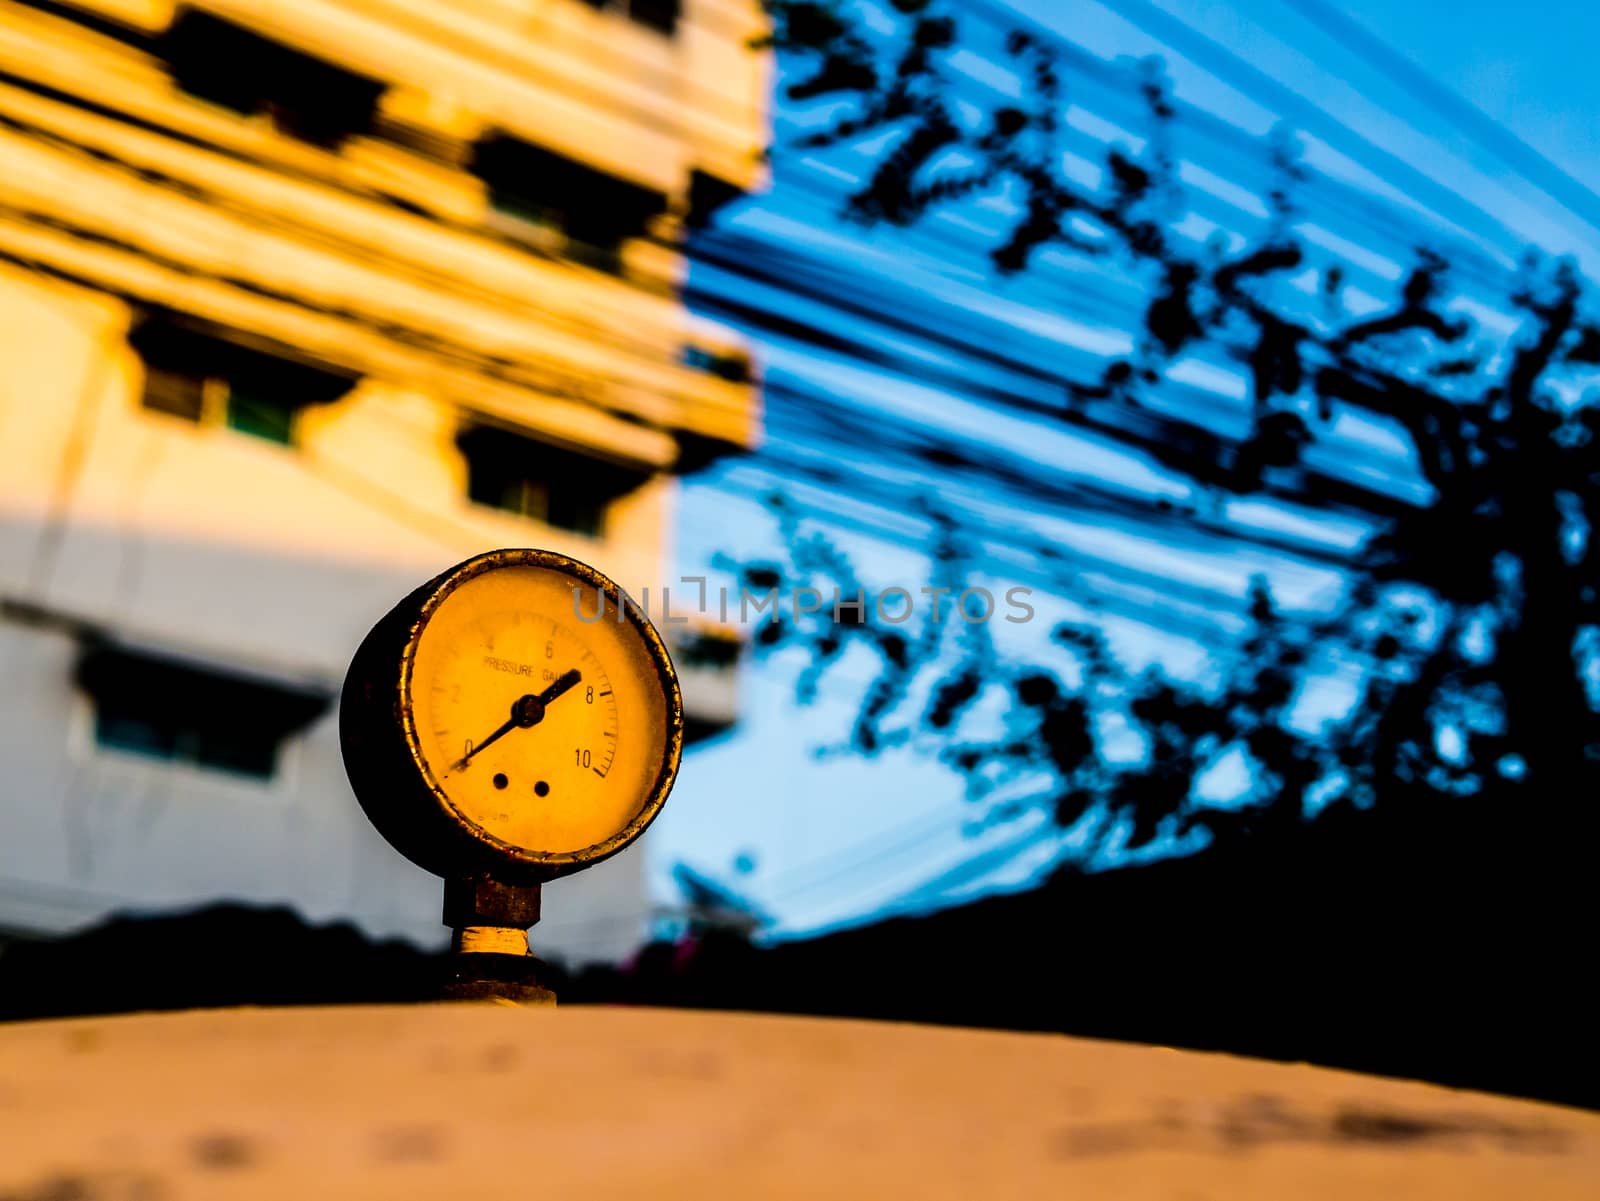 the old pressure gauge of watertank at sunset by golengstock